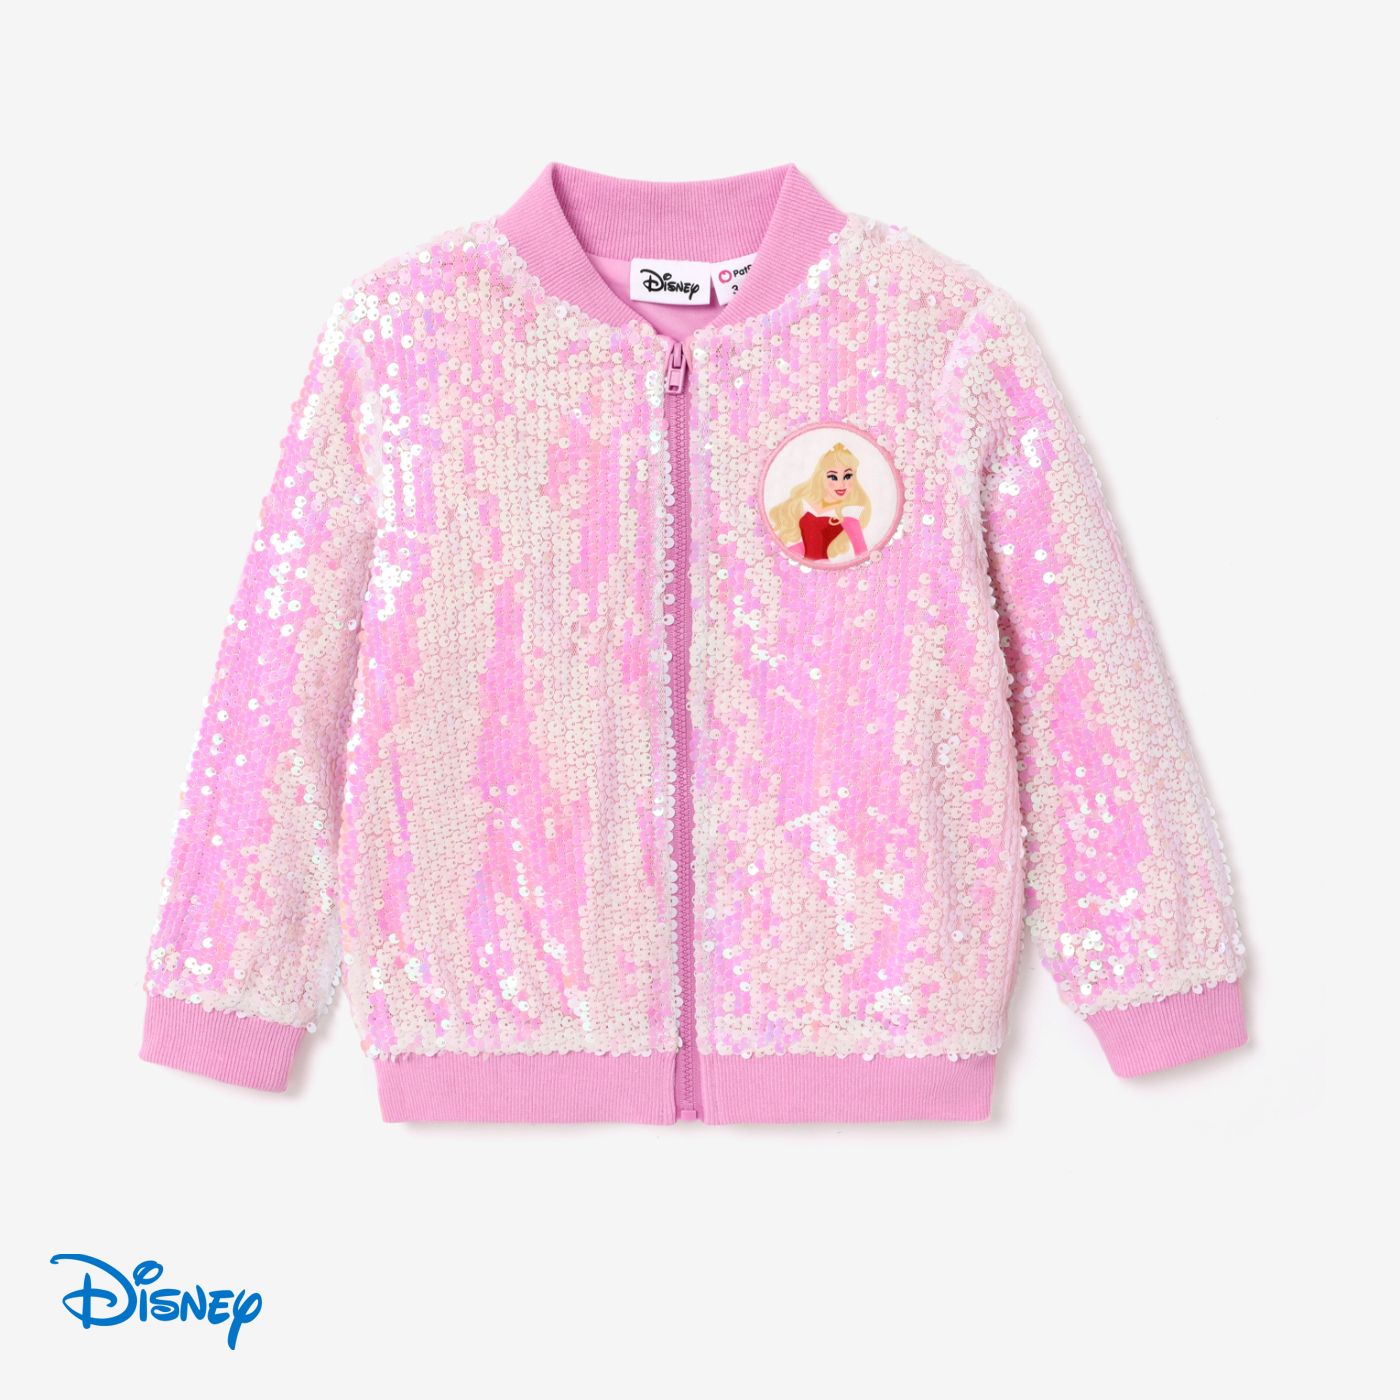 Disney Princess Toddler Girl Character Print Sequin Embroidered Long-sleeve Jacket